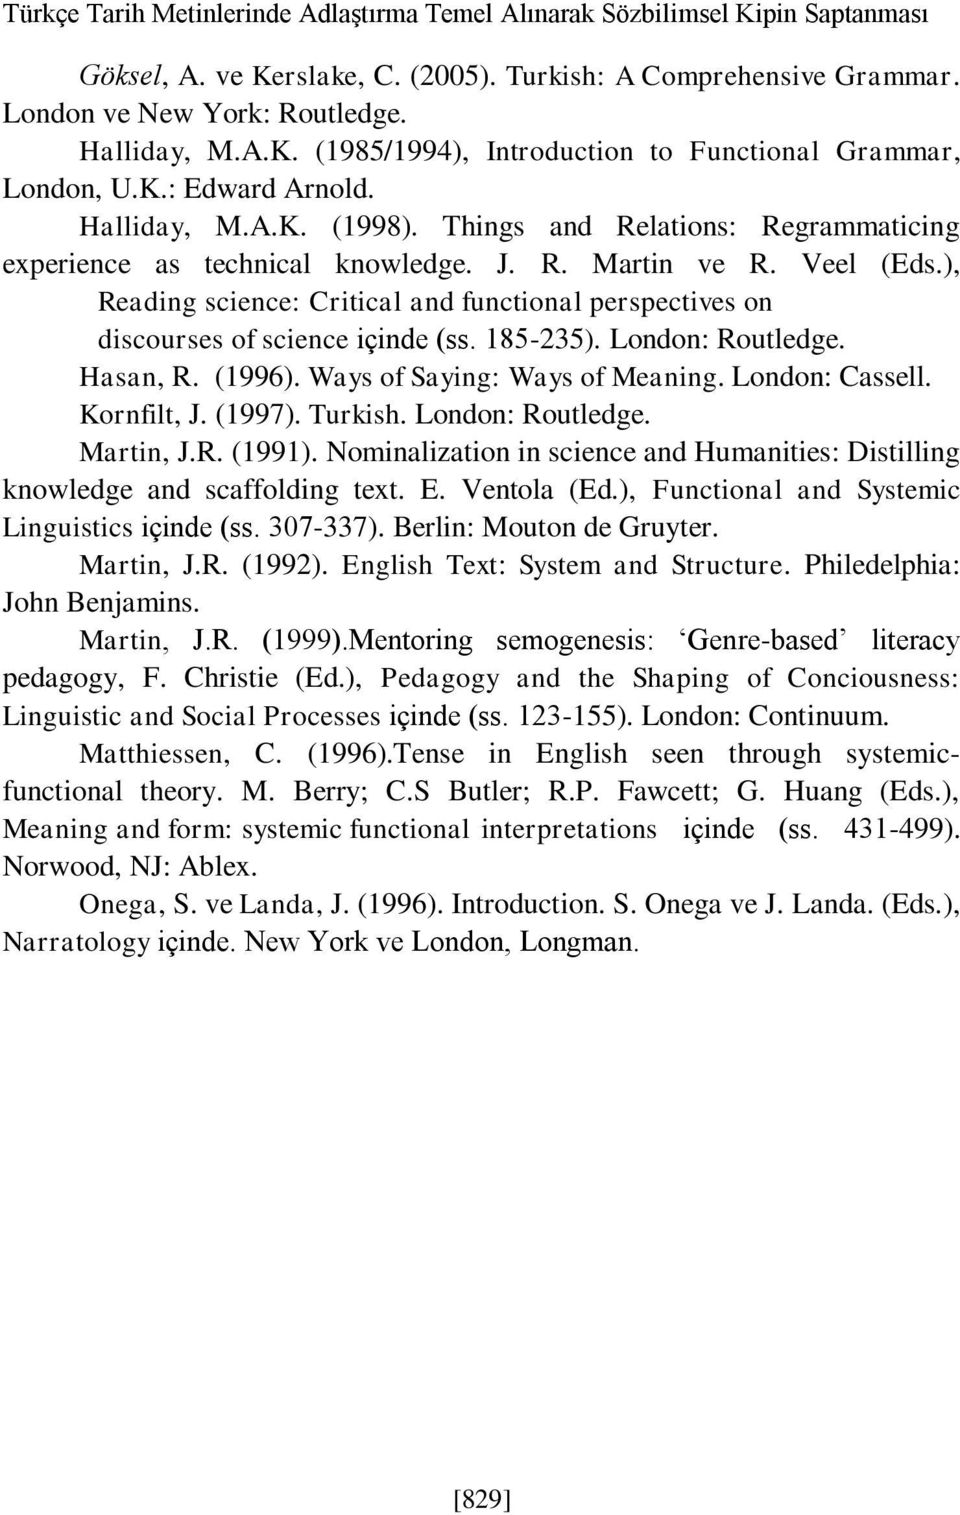 ), Reading science: Critical and functional perspectives on discourses of science içinde (ss. 185-235). London: Routledge. Hasan, R. (1996). Ways of Saying: Ways of Meaning. London: Cassell.